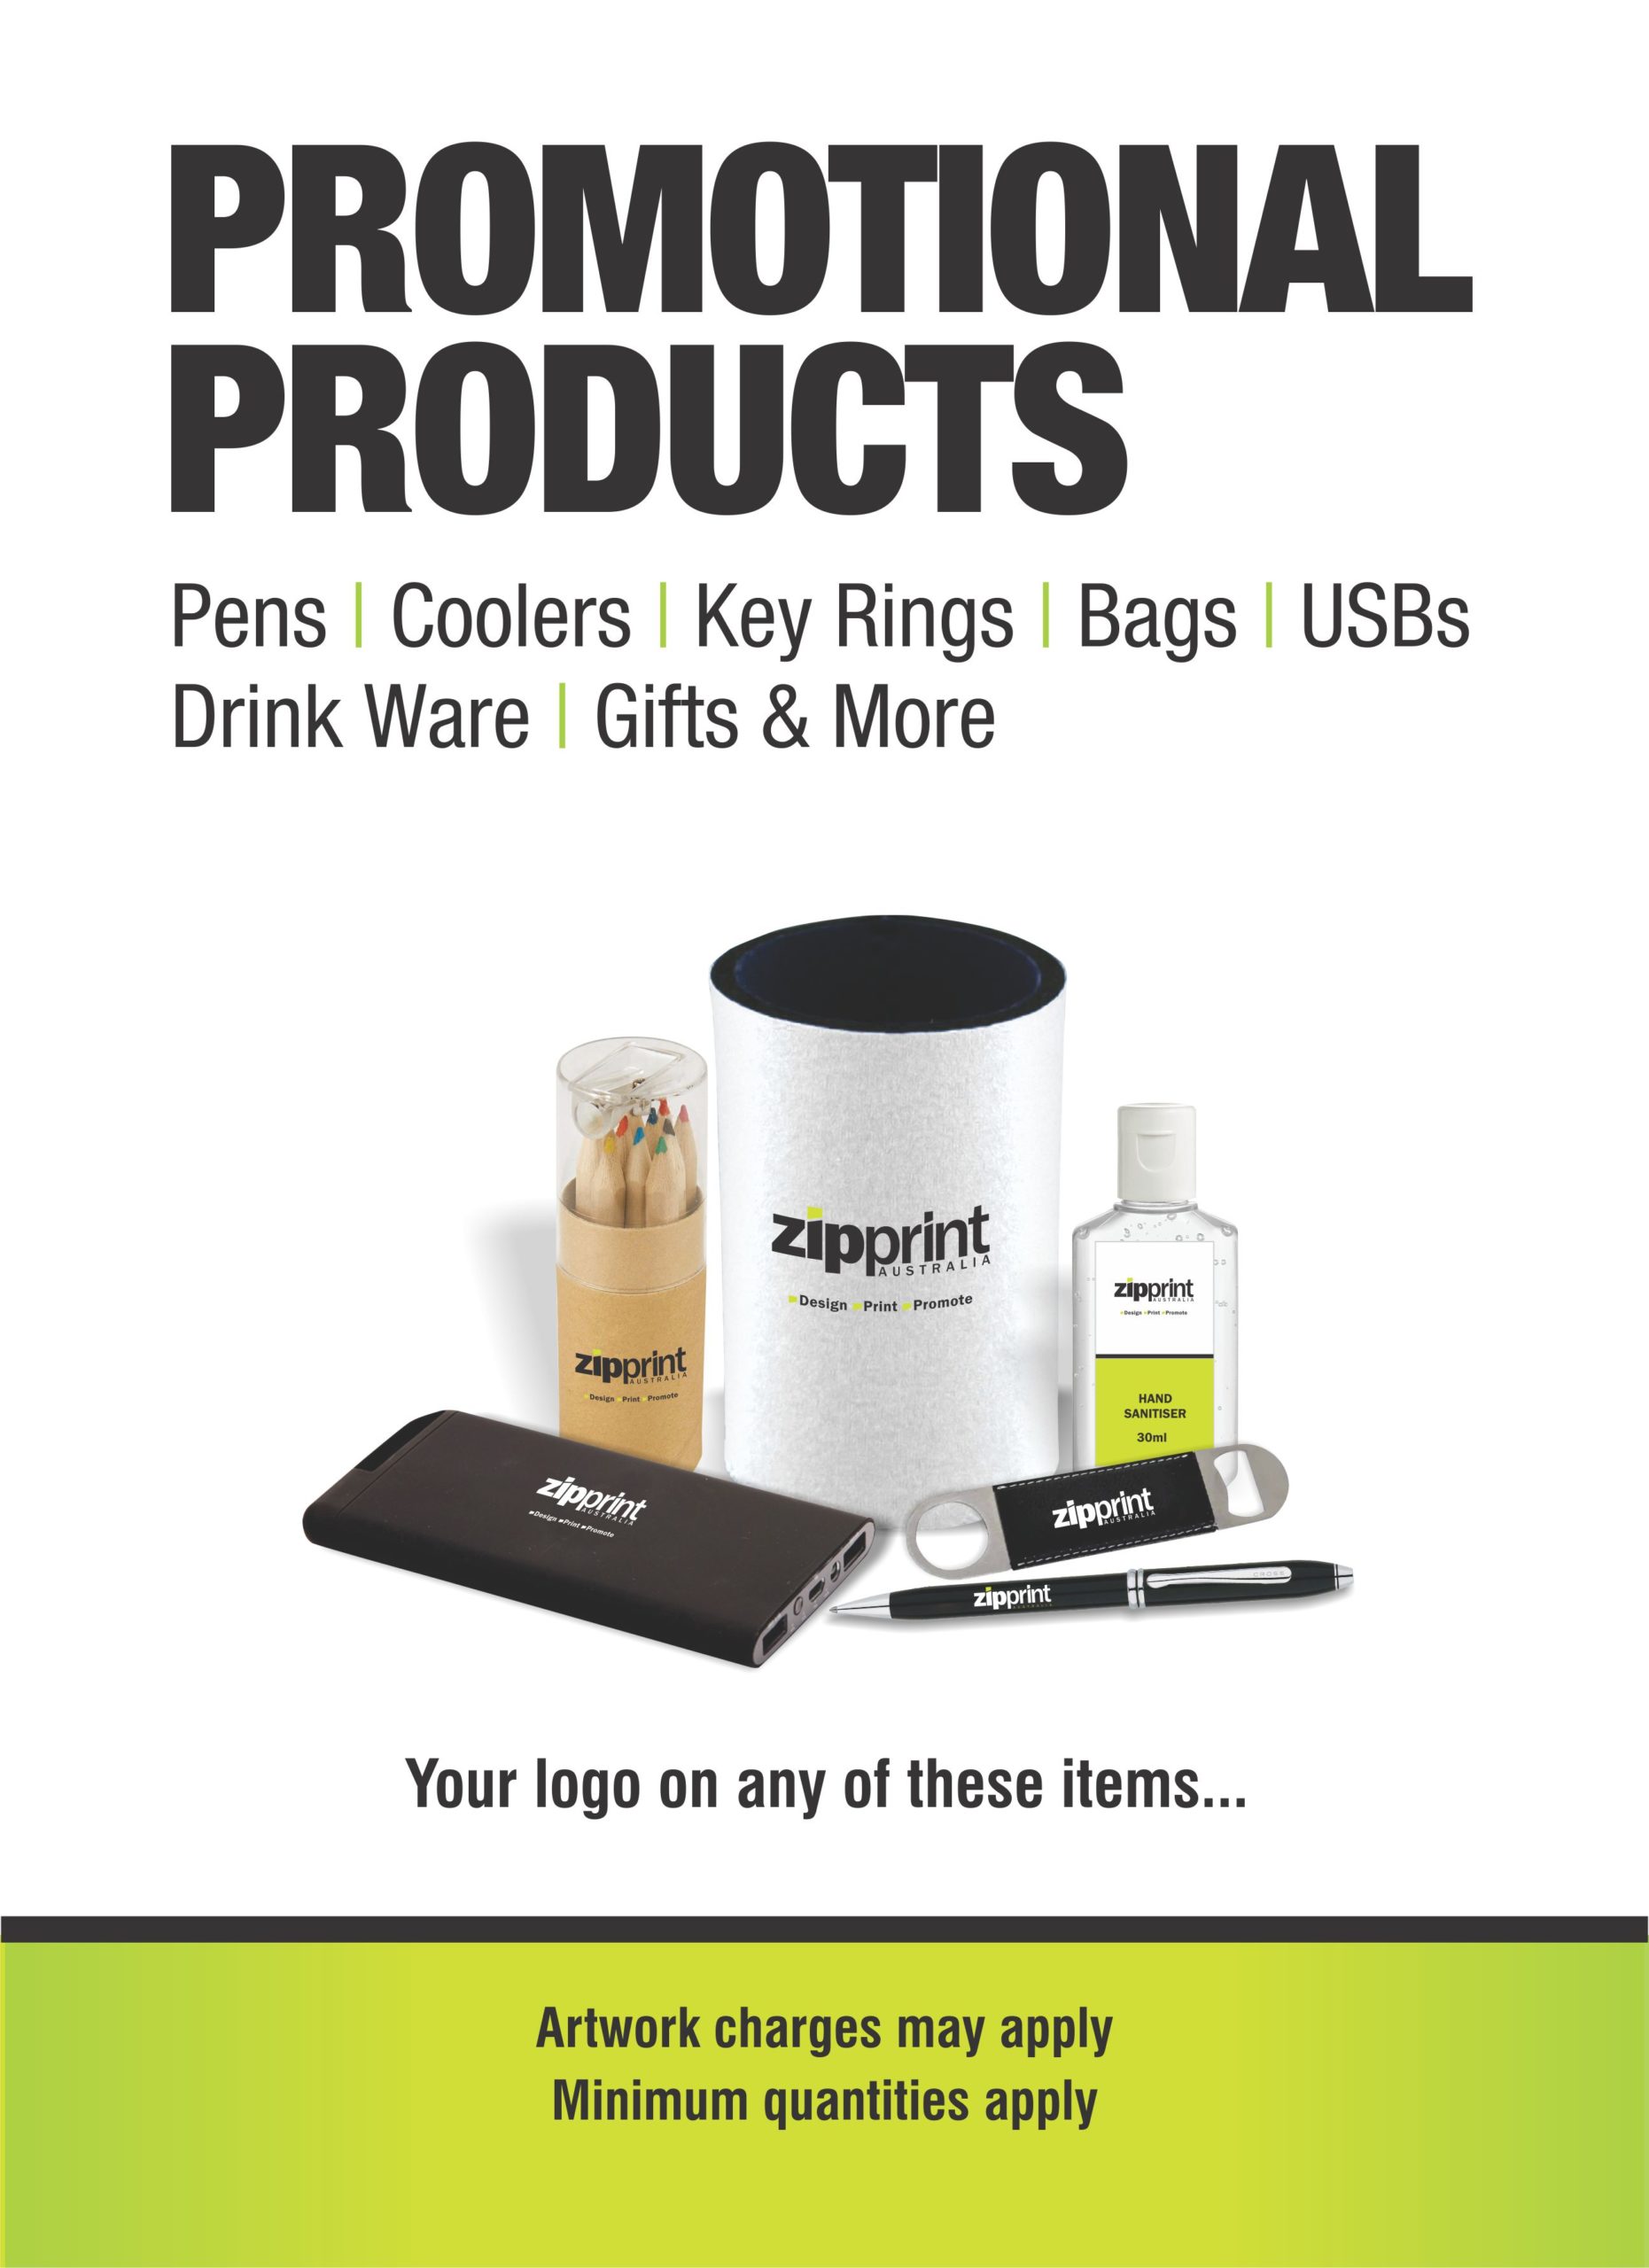 PromotionalProducts_Poster